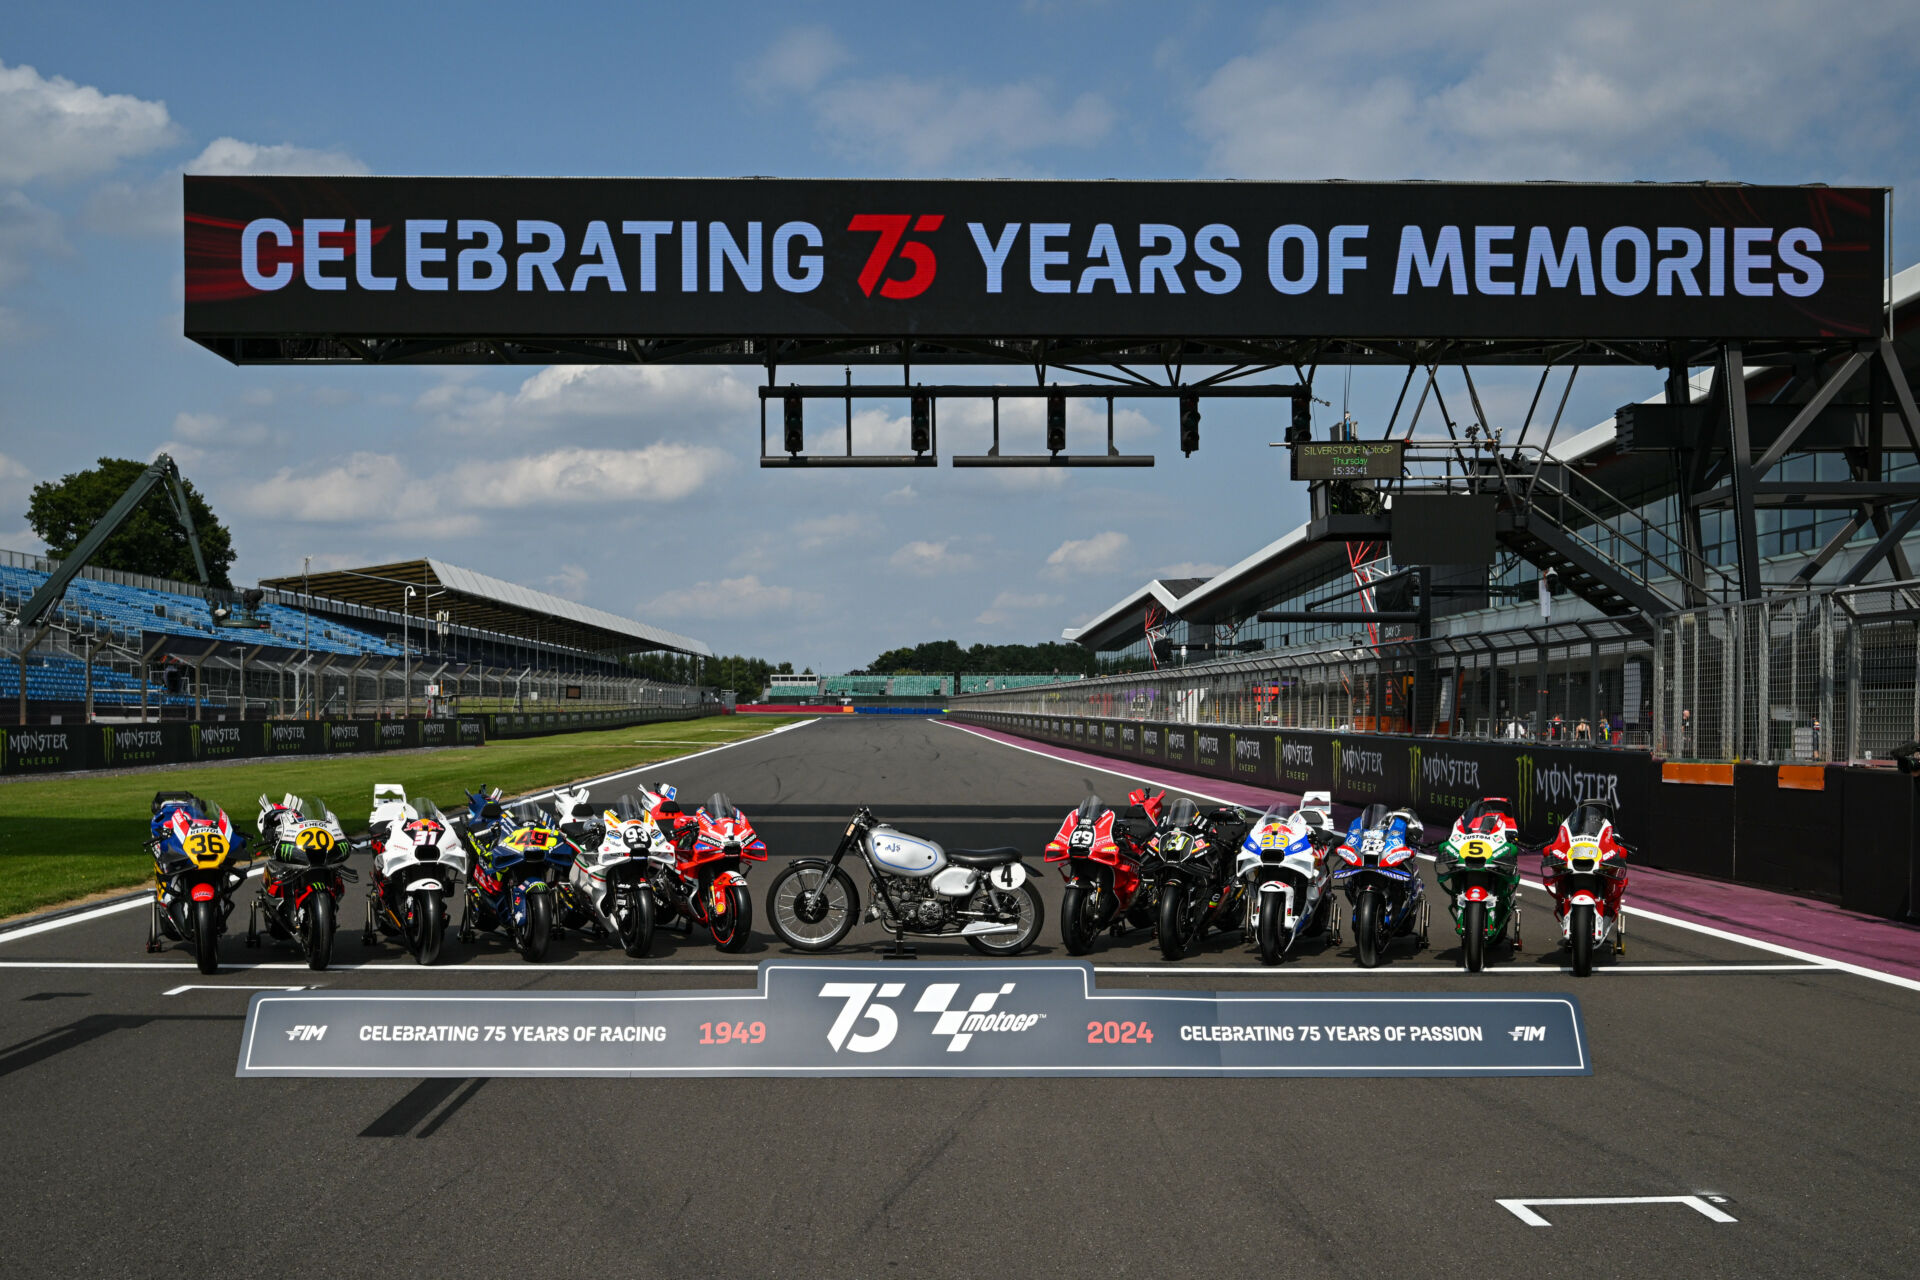 The AJS Porcupine (center) that won the first World Championship, according to Dorna, and the 12 special liveries in play this weekend at Silverstone. Photo courtesy Dorna.